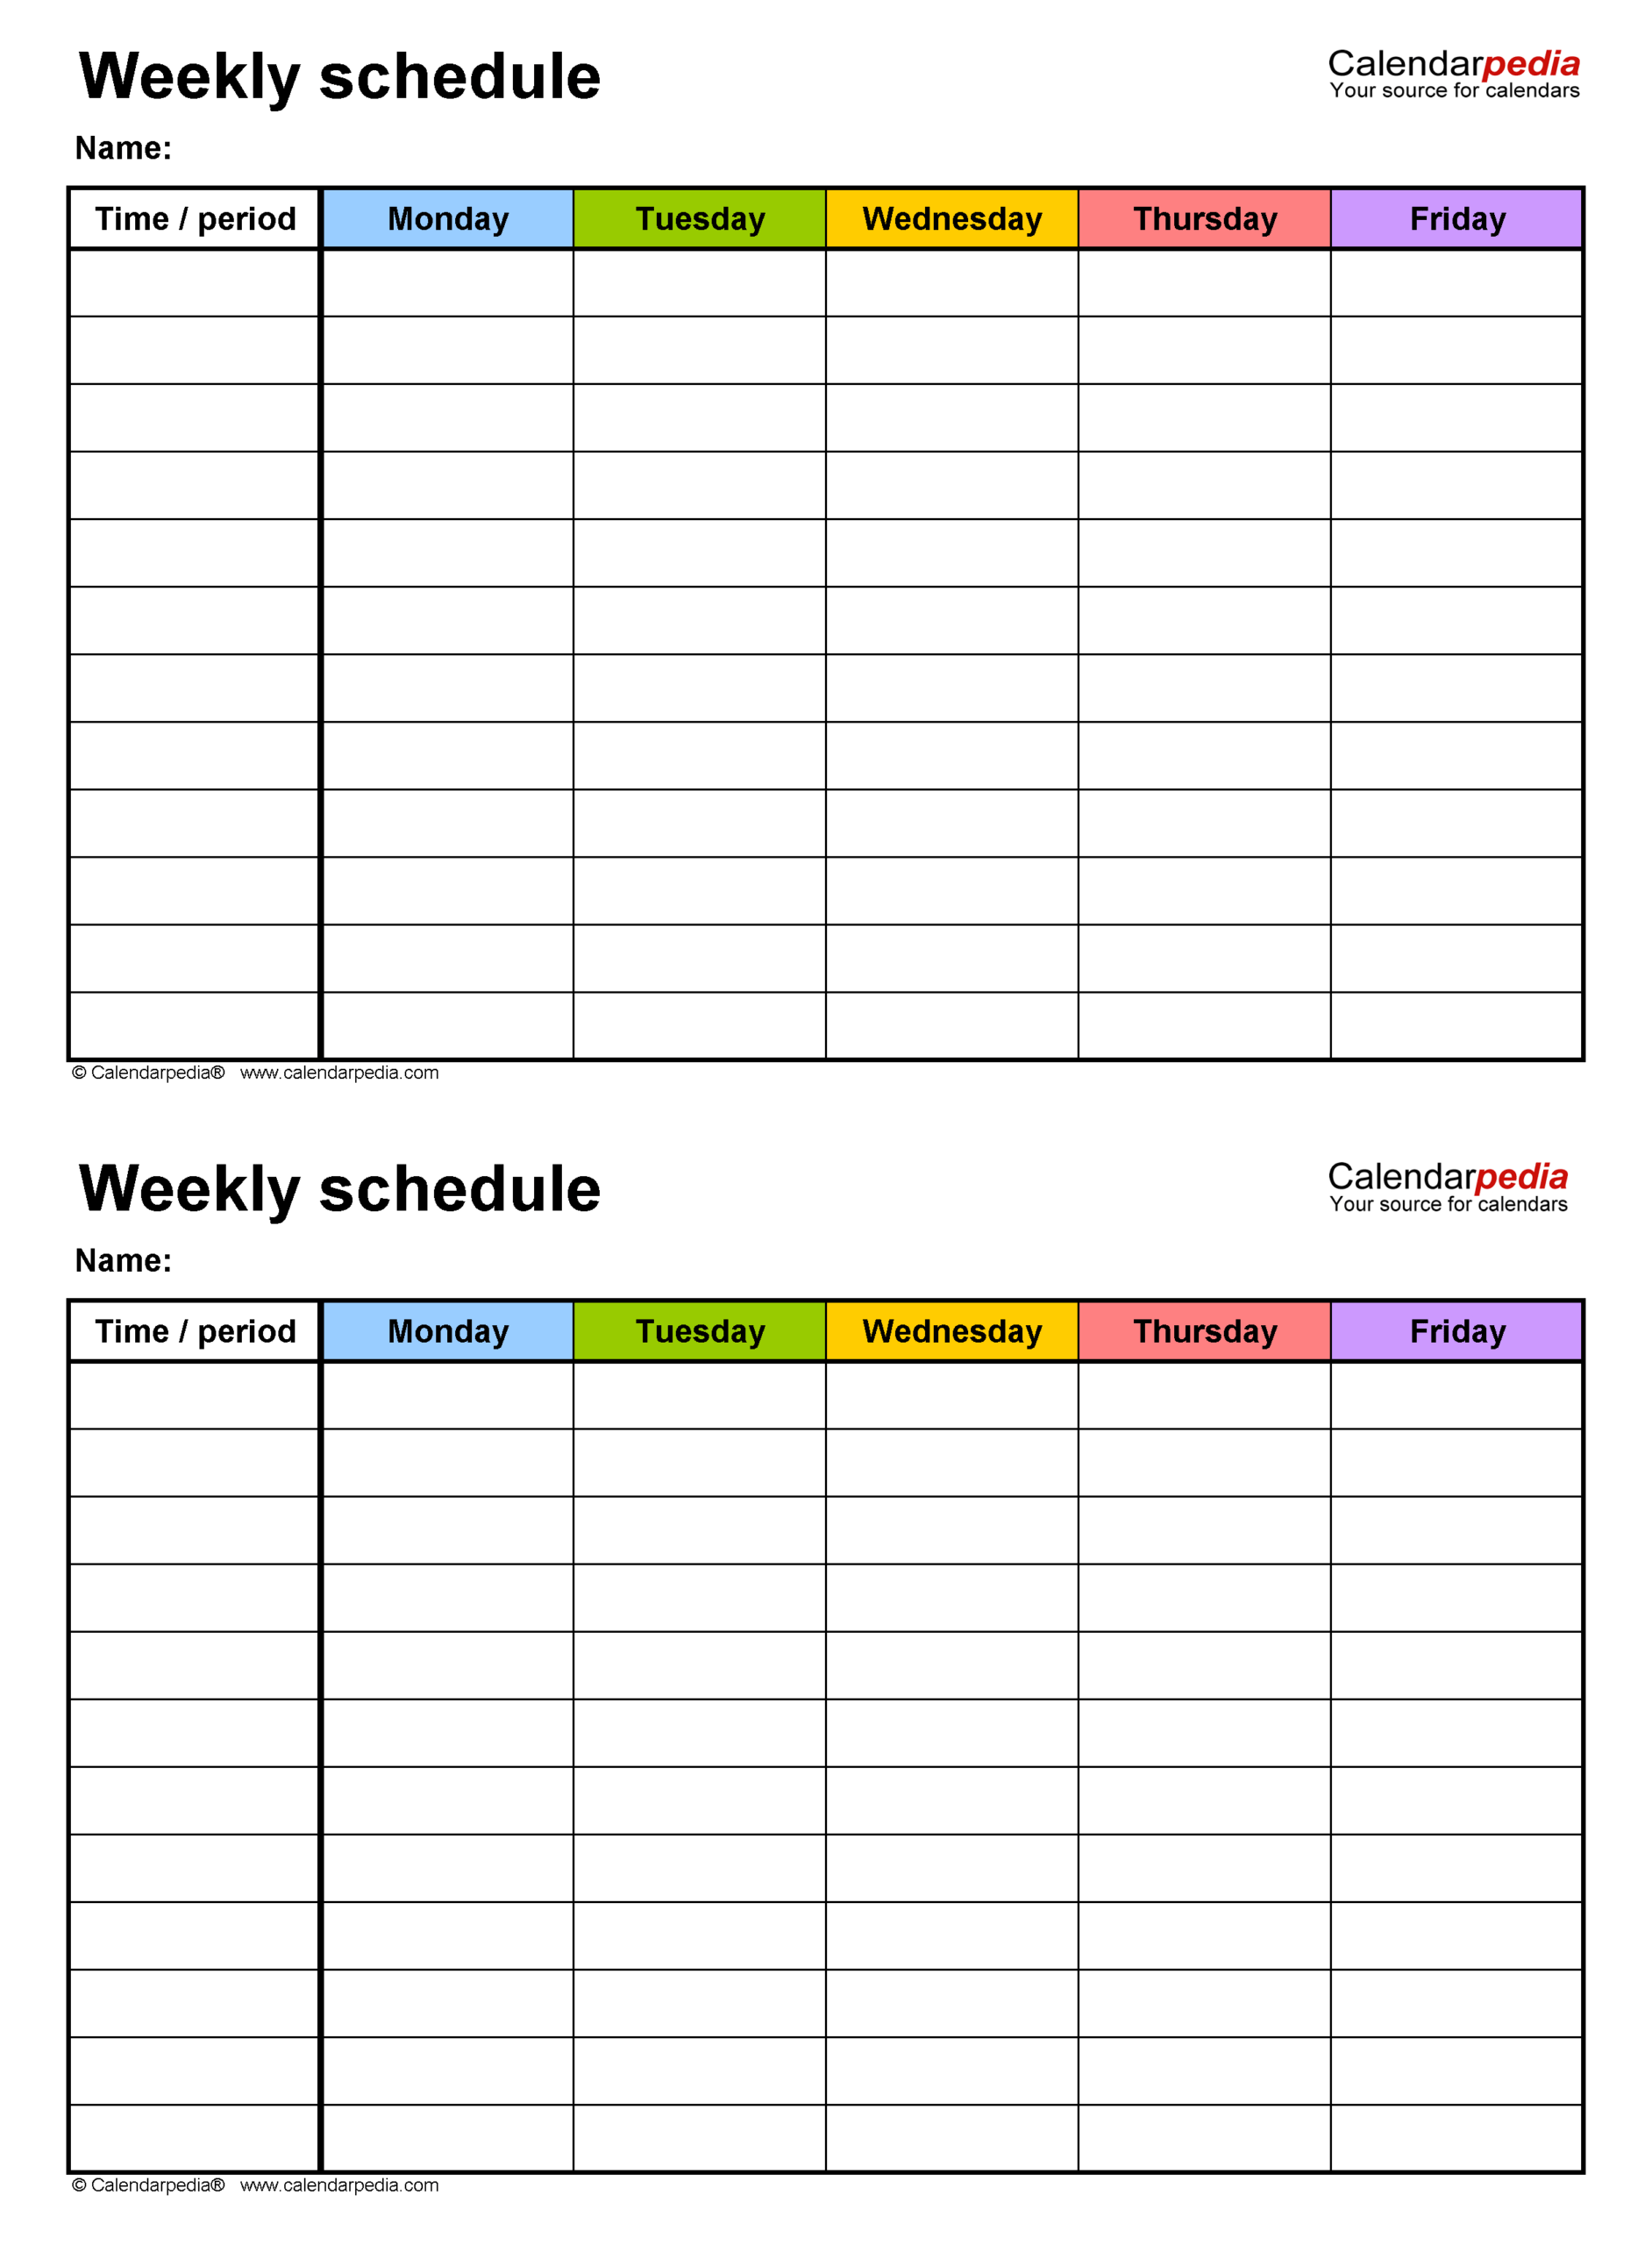 Free Weekly Schedule Templates For Word – 18 Templates With Blank Monthly Work Schedule Template